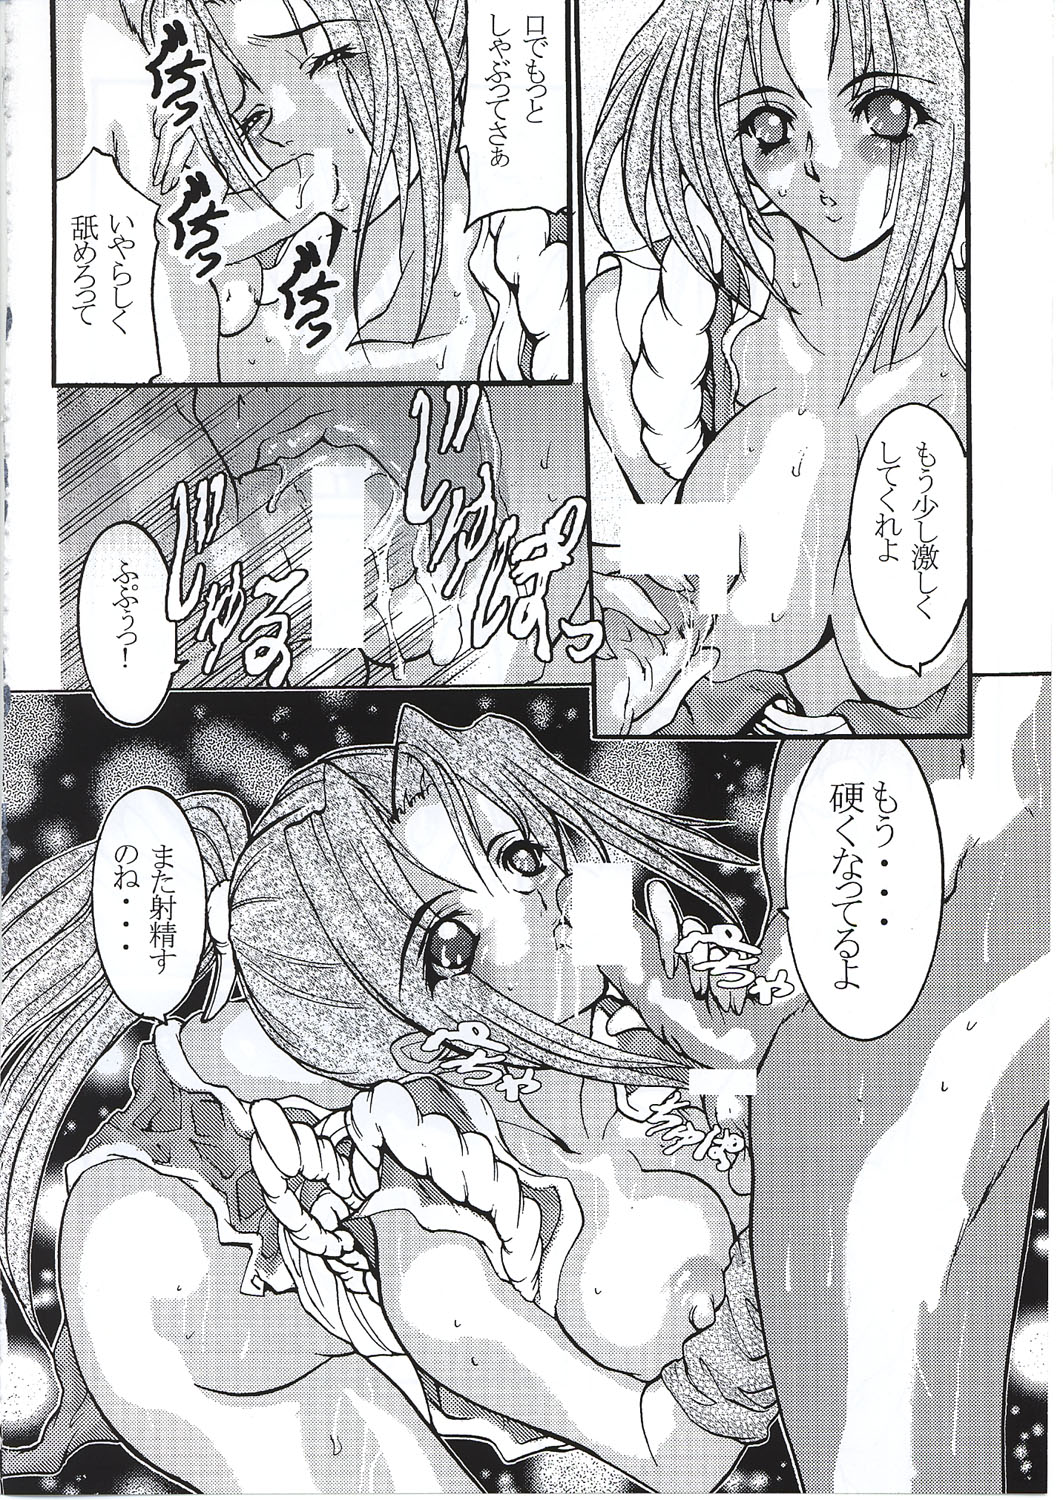 (C62) [NINE TAIL (GRIFON, YaO.)] Toraware Koneko (King of Fighters, Dead or Alive) page 14 full